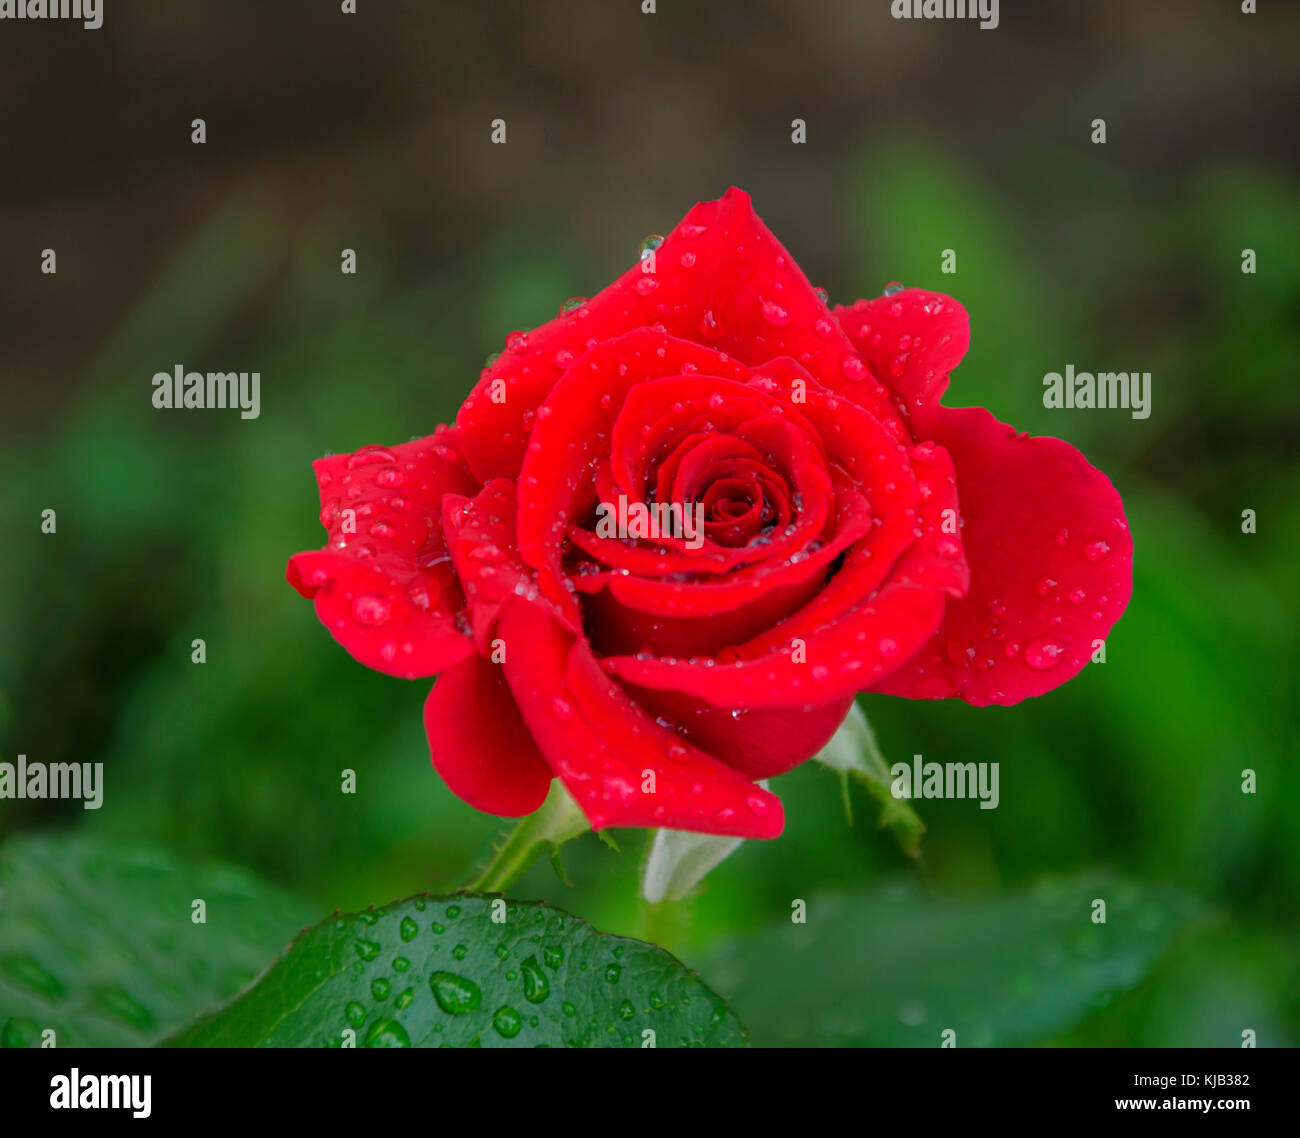 summer in the garden a beautiful red rose flower with a pleasant scent, with droplets of water after a rain Stock Photo